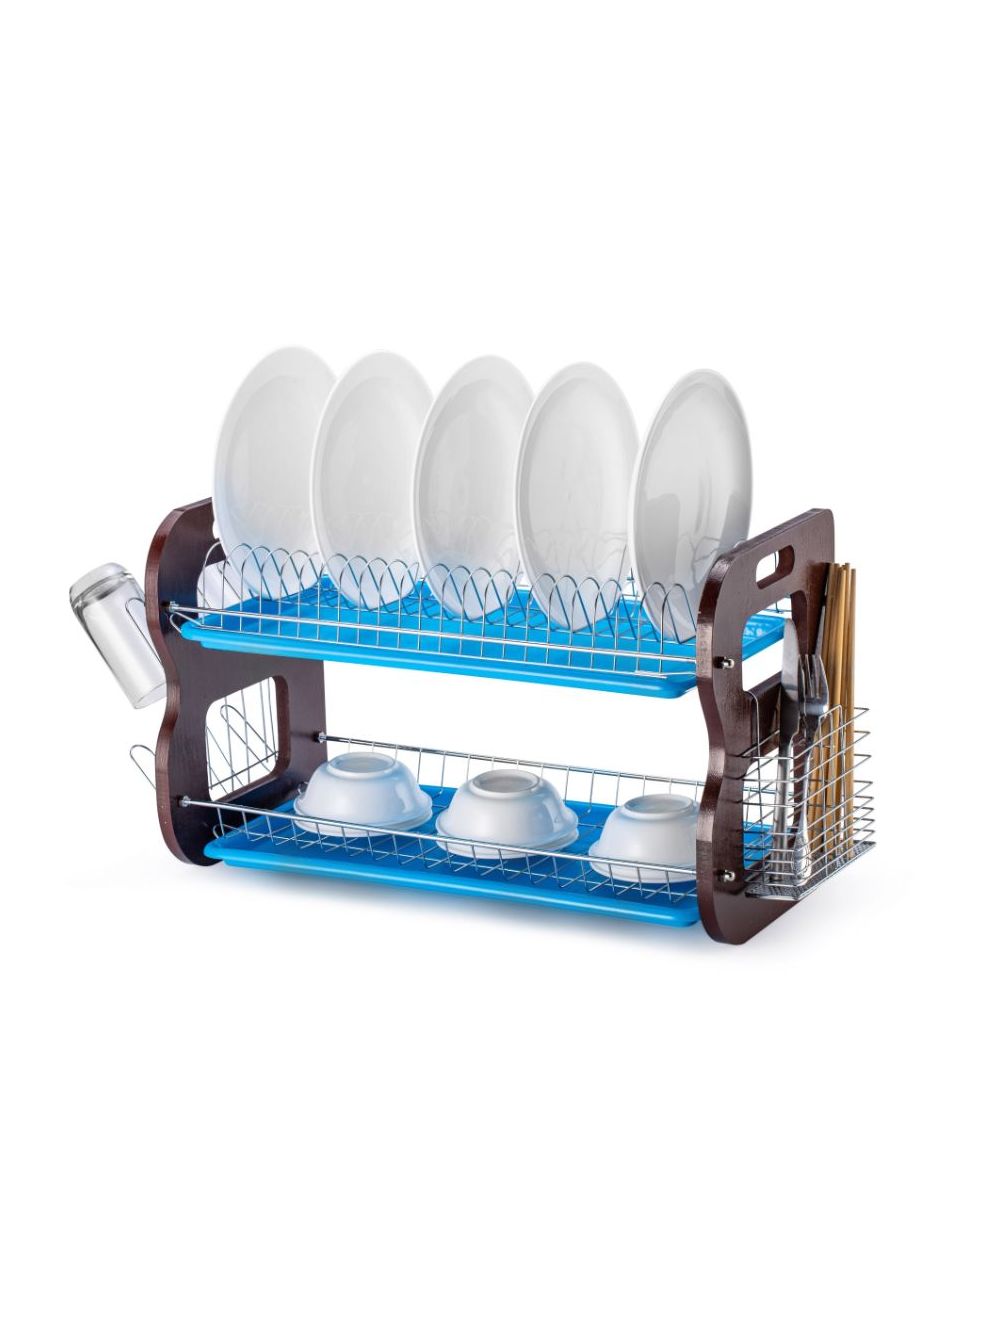 Royalford RF9667 2-Layer Dish Rack MDF & Stainless Steel, 56x26x35 cm